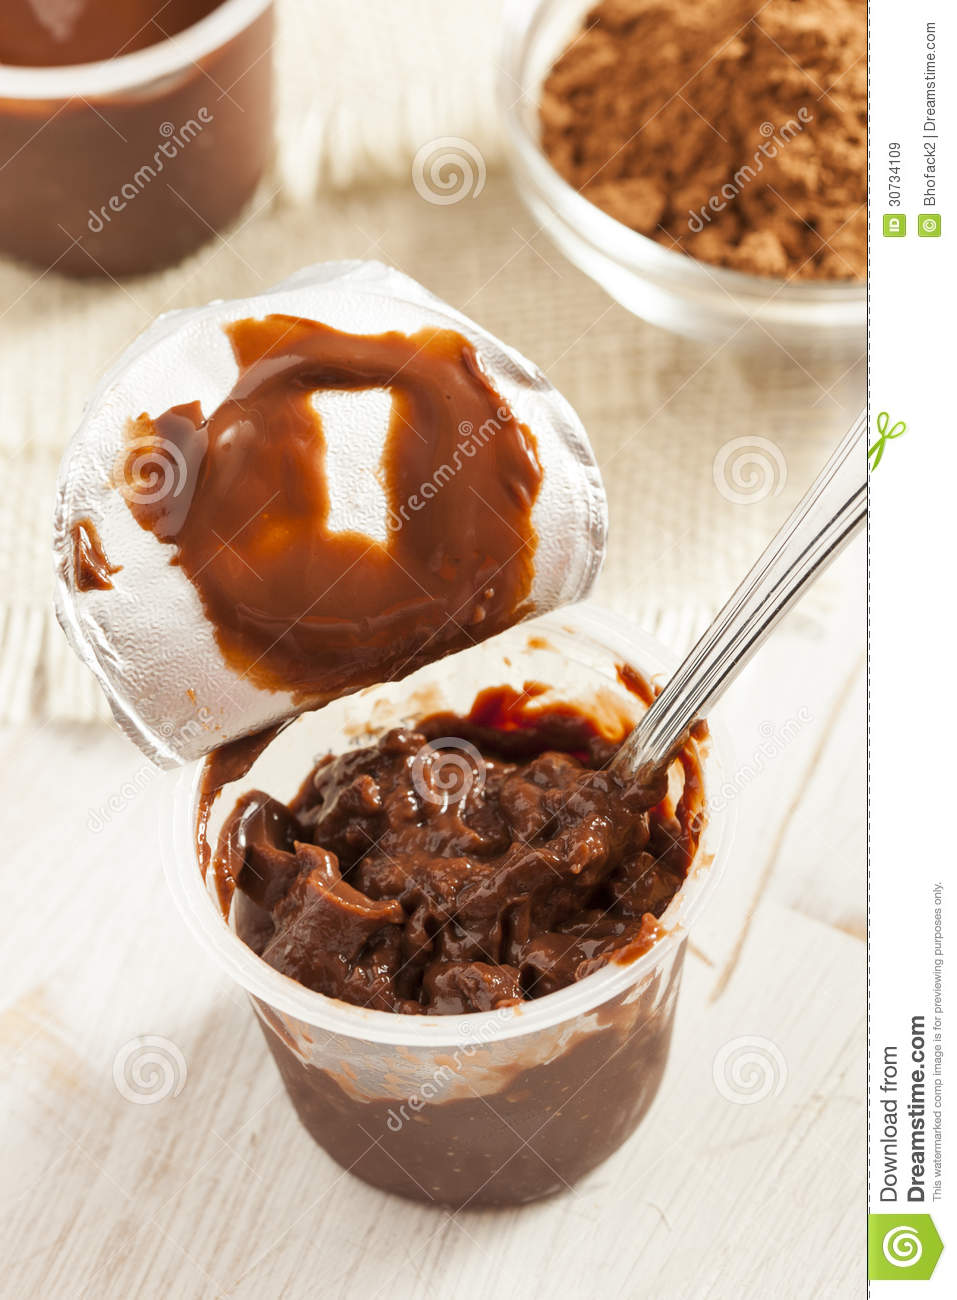 Chocolate Snack Pack Pudding Cup Royalty Free Stock Images   Image    